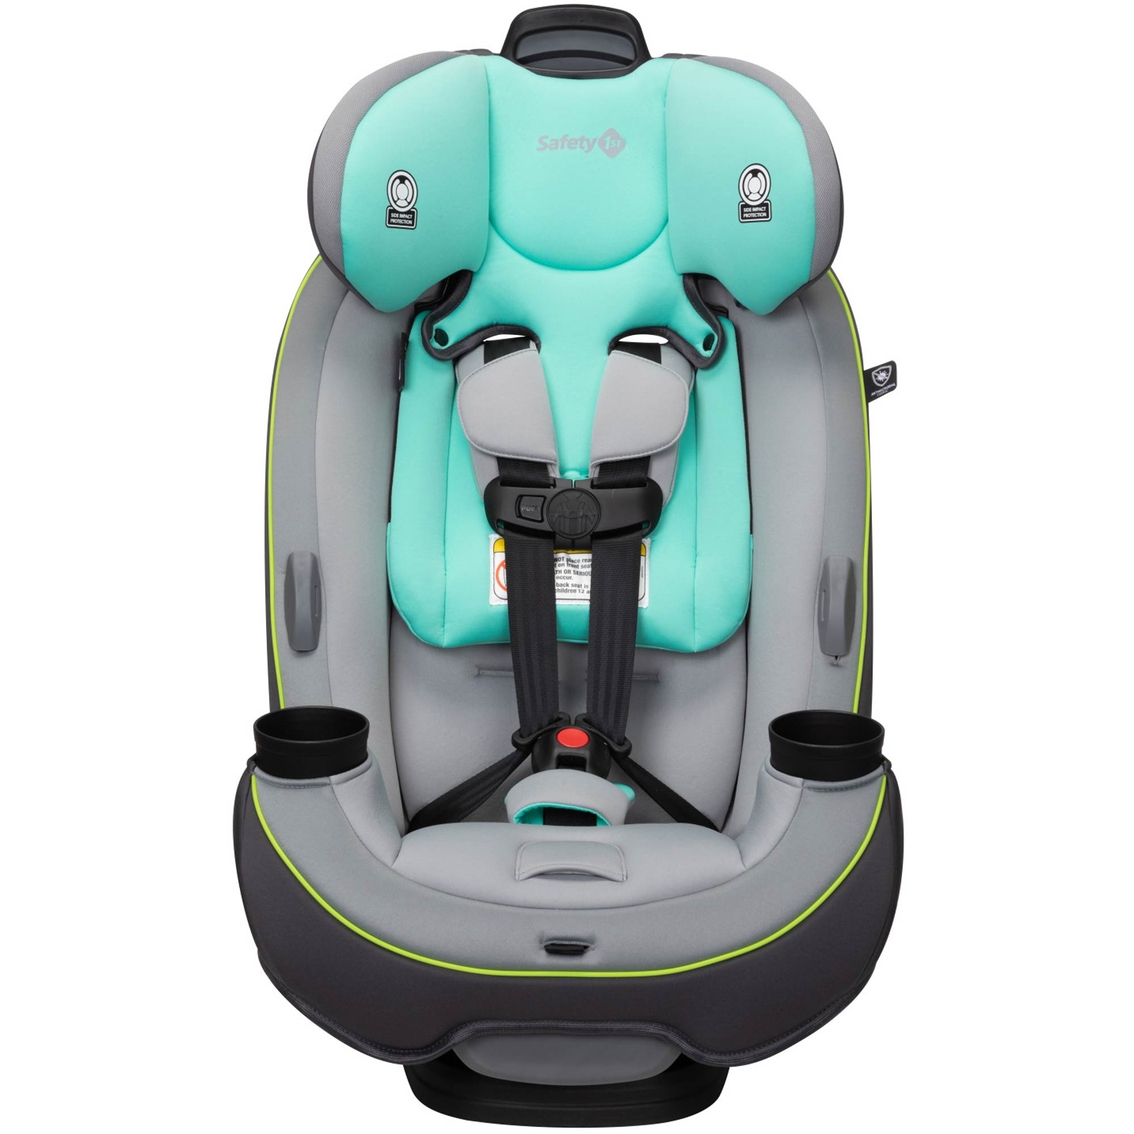 Safety 1st Grow and Go All in One Convertible Car Seat - Image 6 of 9